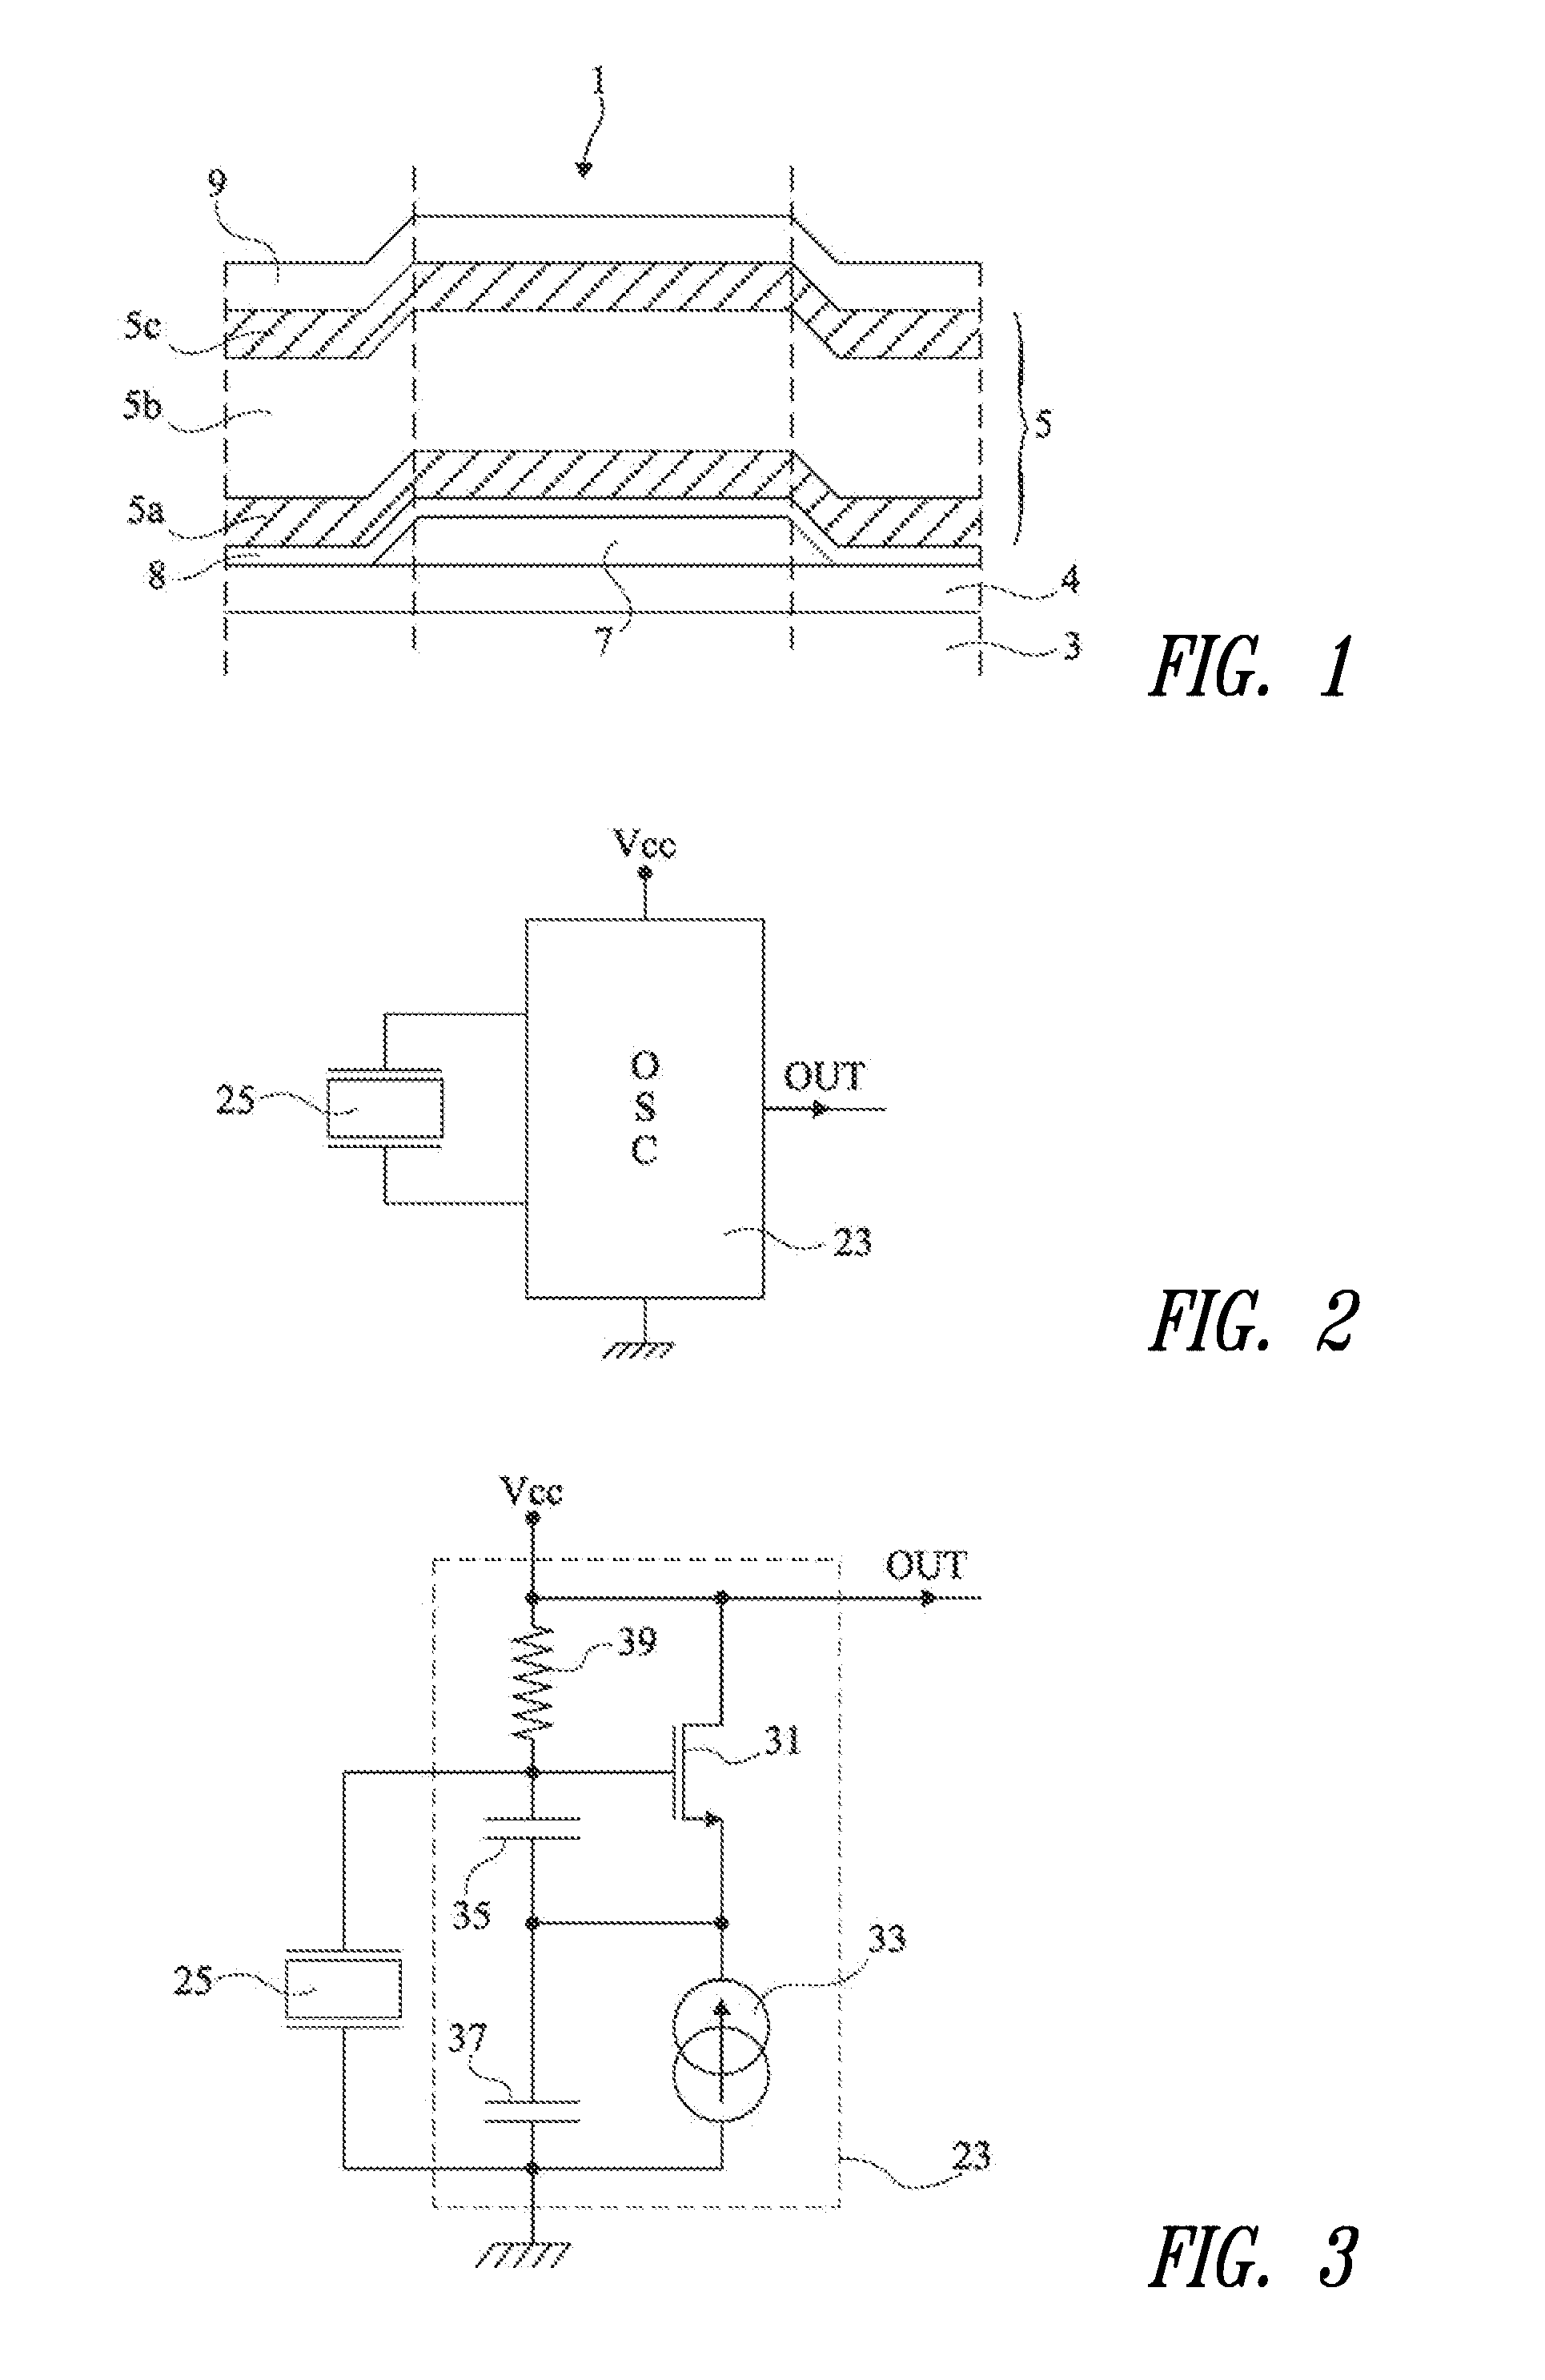 Method of adjustment during manufacture of a circuit having a capacitor